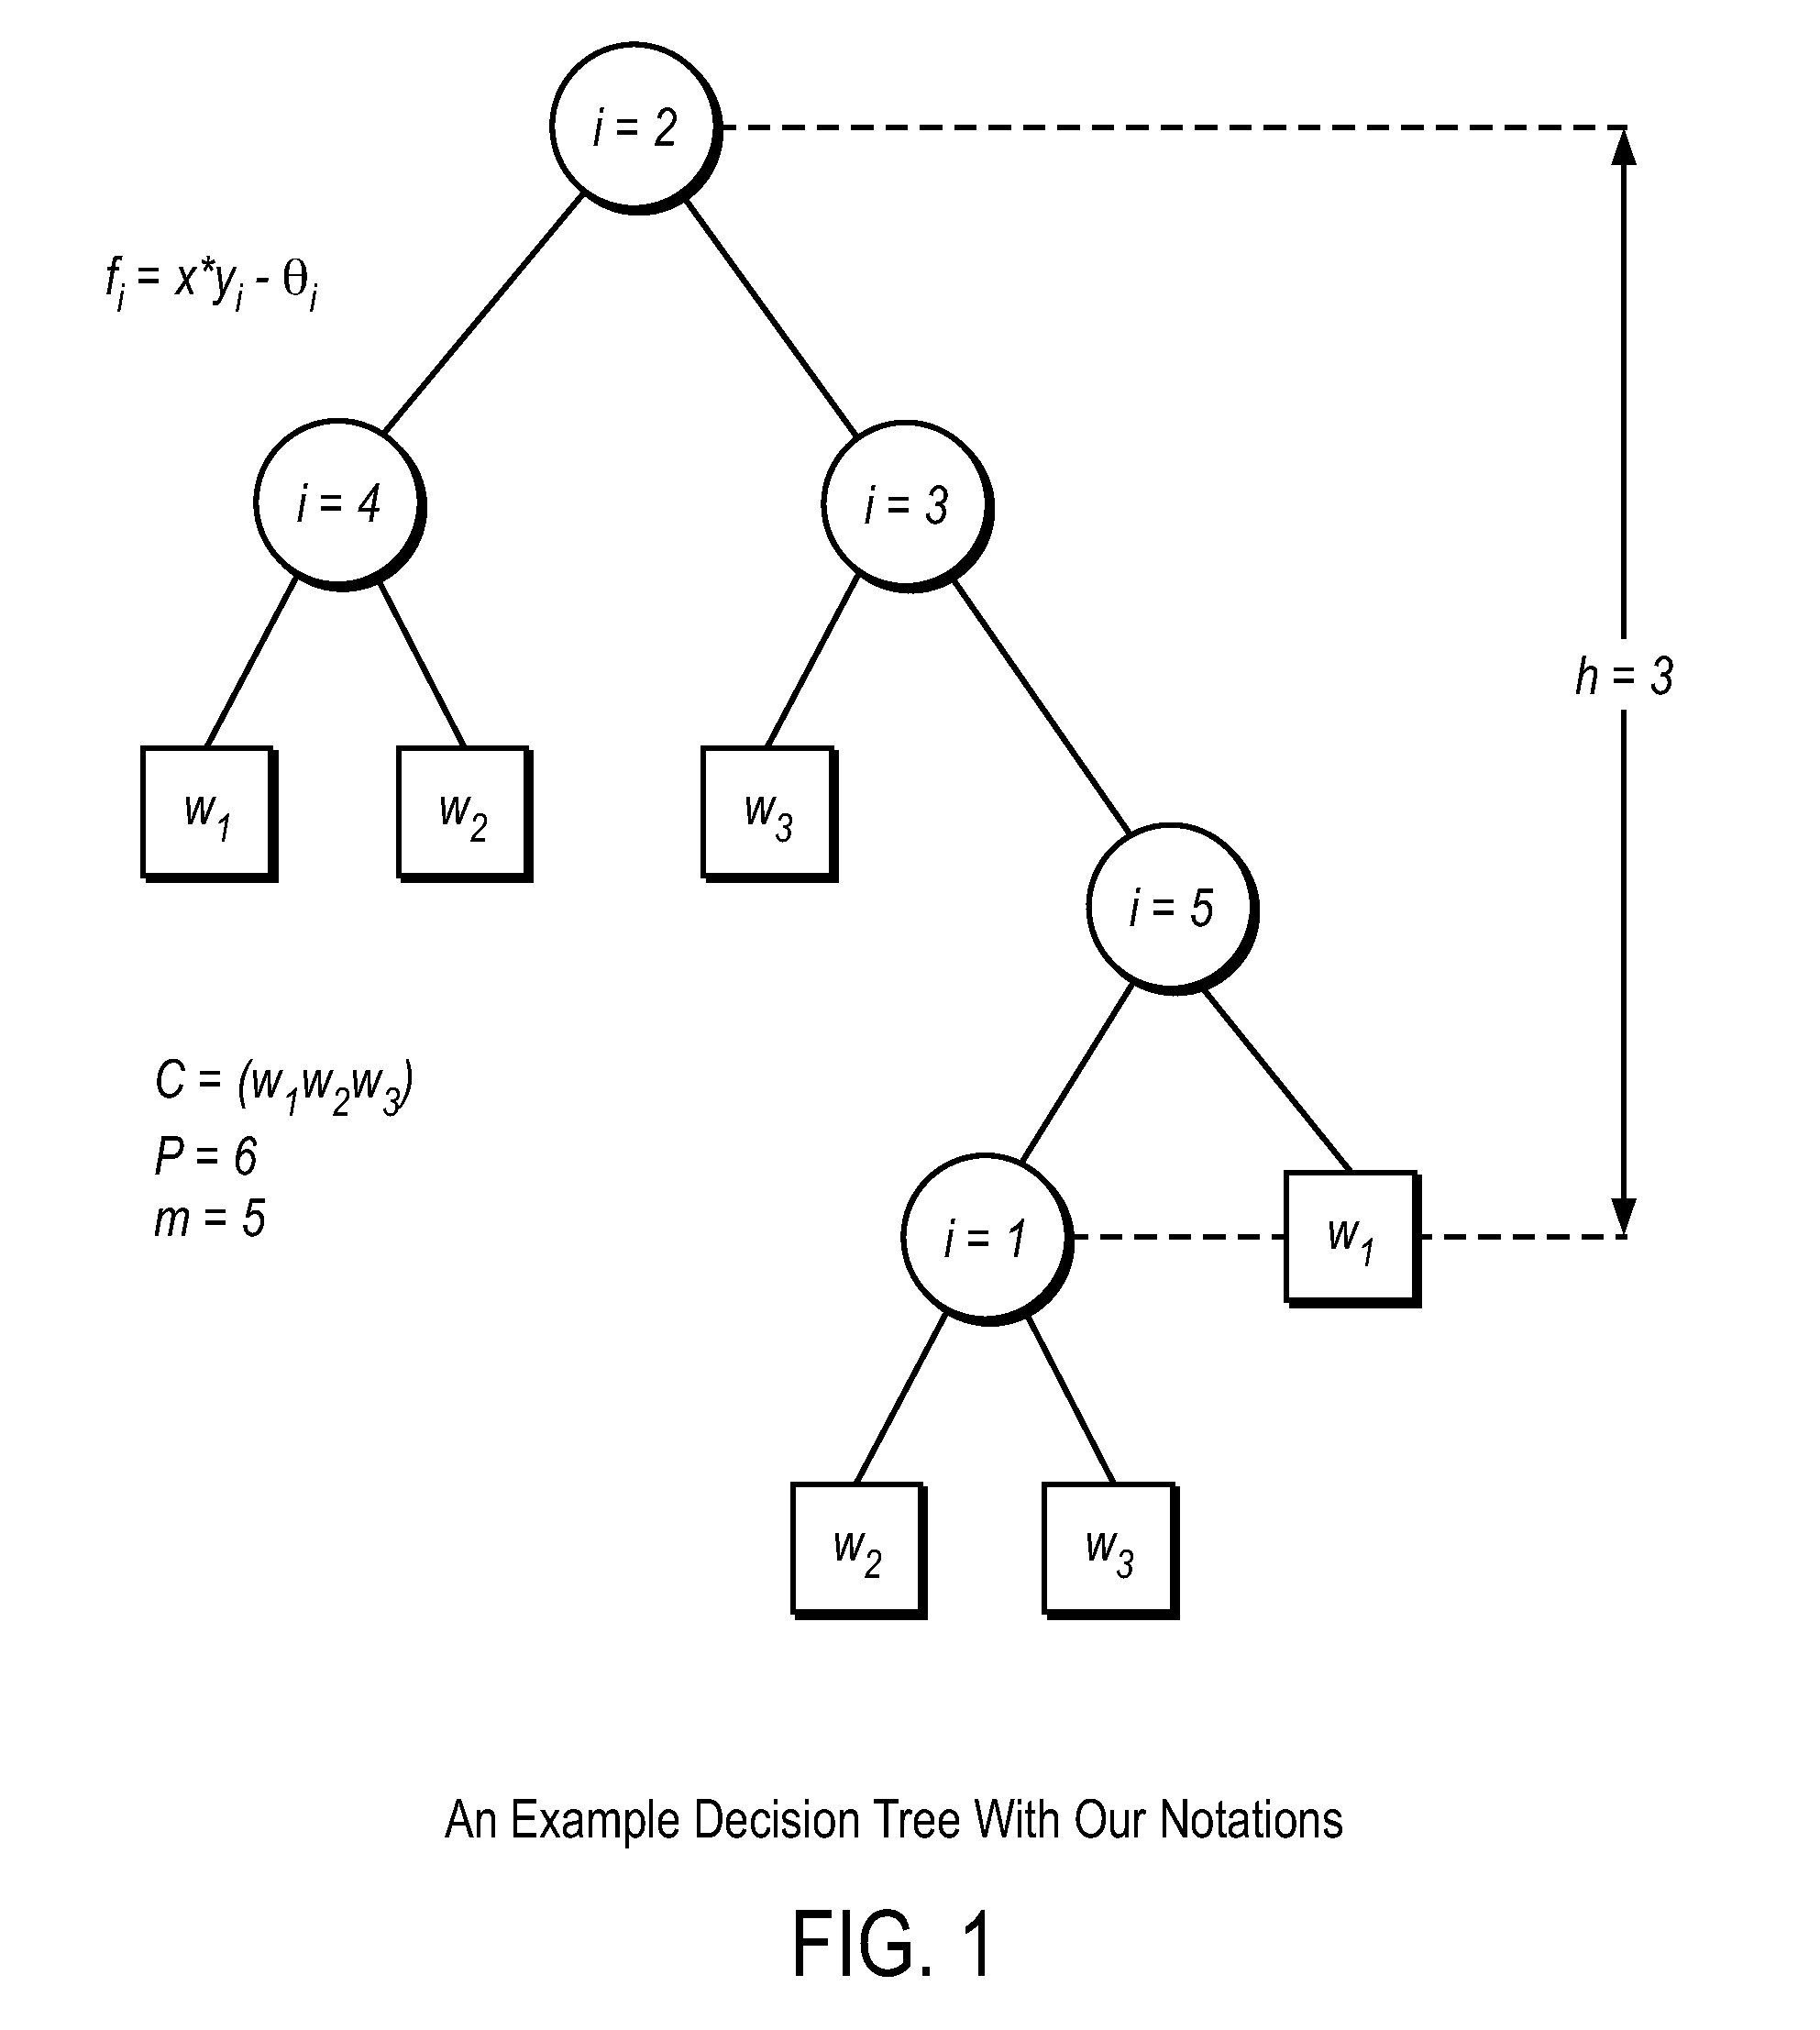 Efficient, remote, private tree-based classification using cryptographic techniques